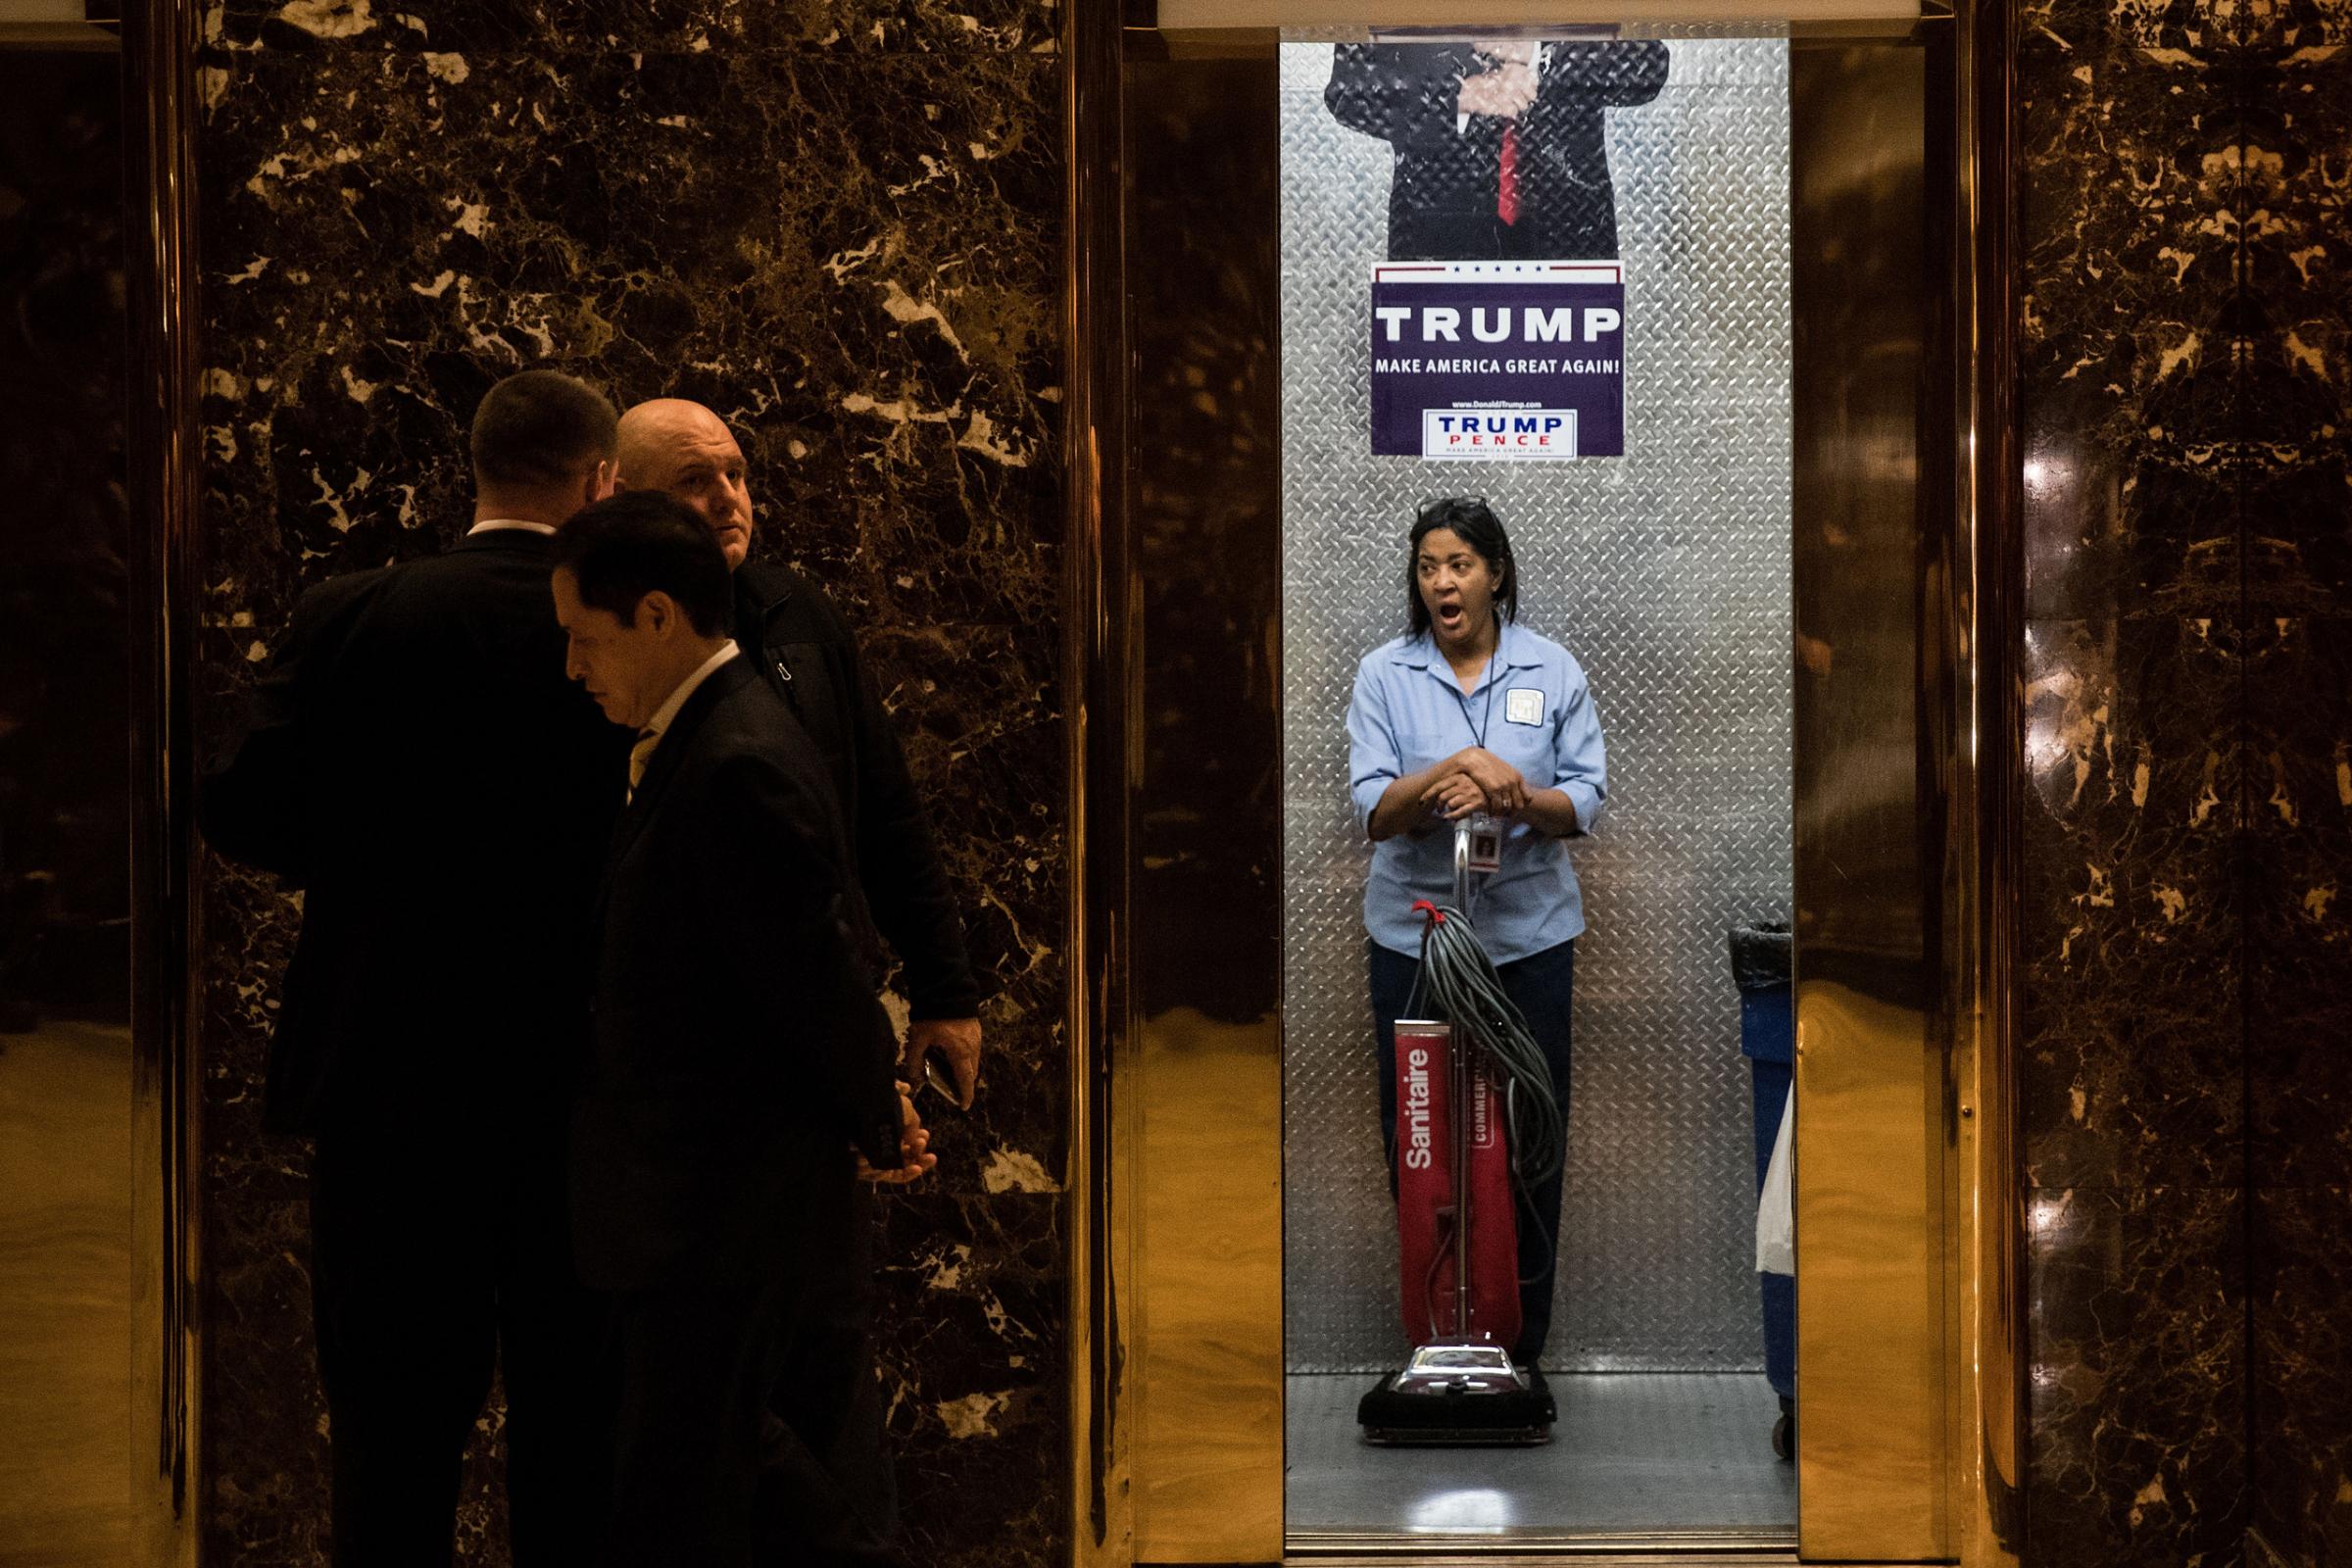 A maintenance worker yawns as she stands in an elevator in the lobby at Trump Tower, on Nov. 14, 2016.